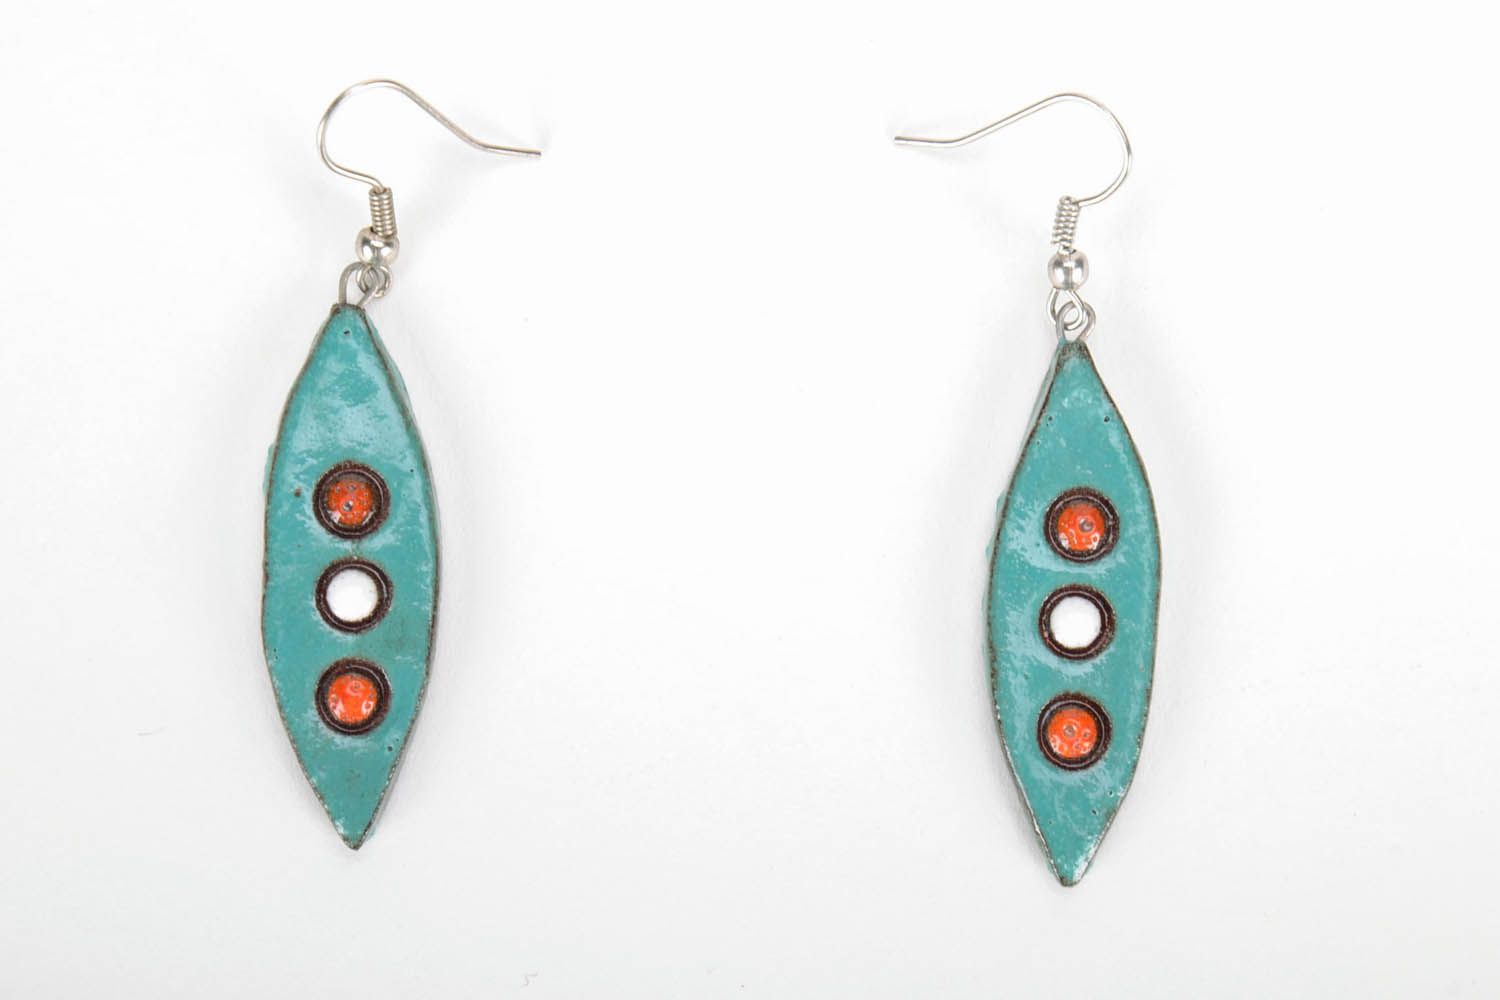 Earrings made of clay photo 2